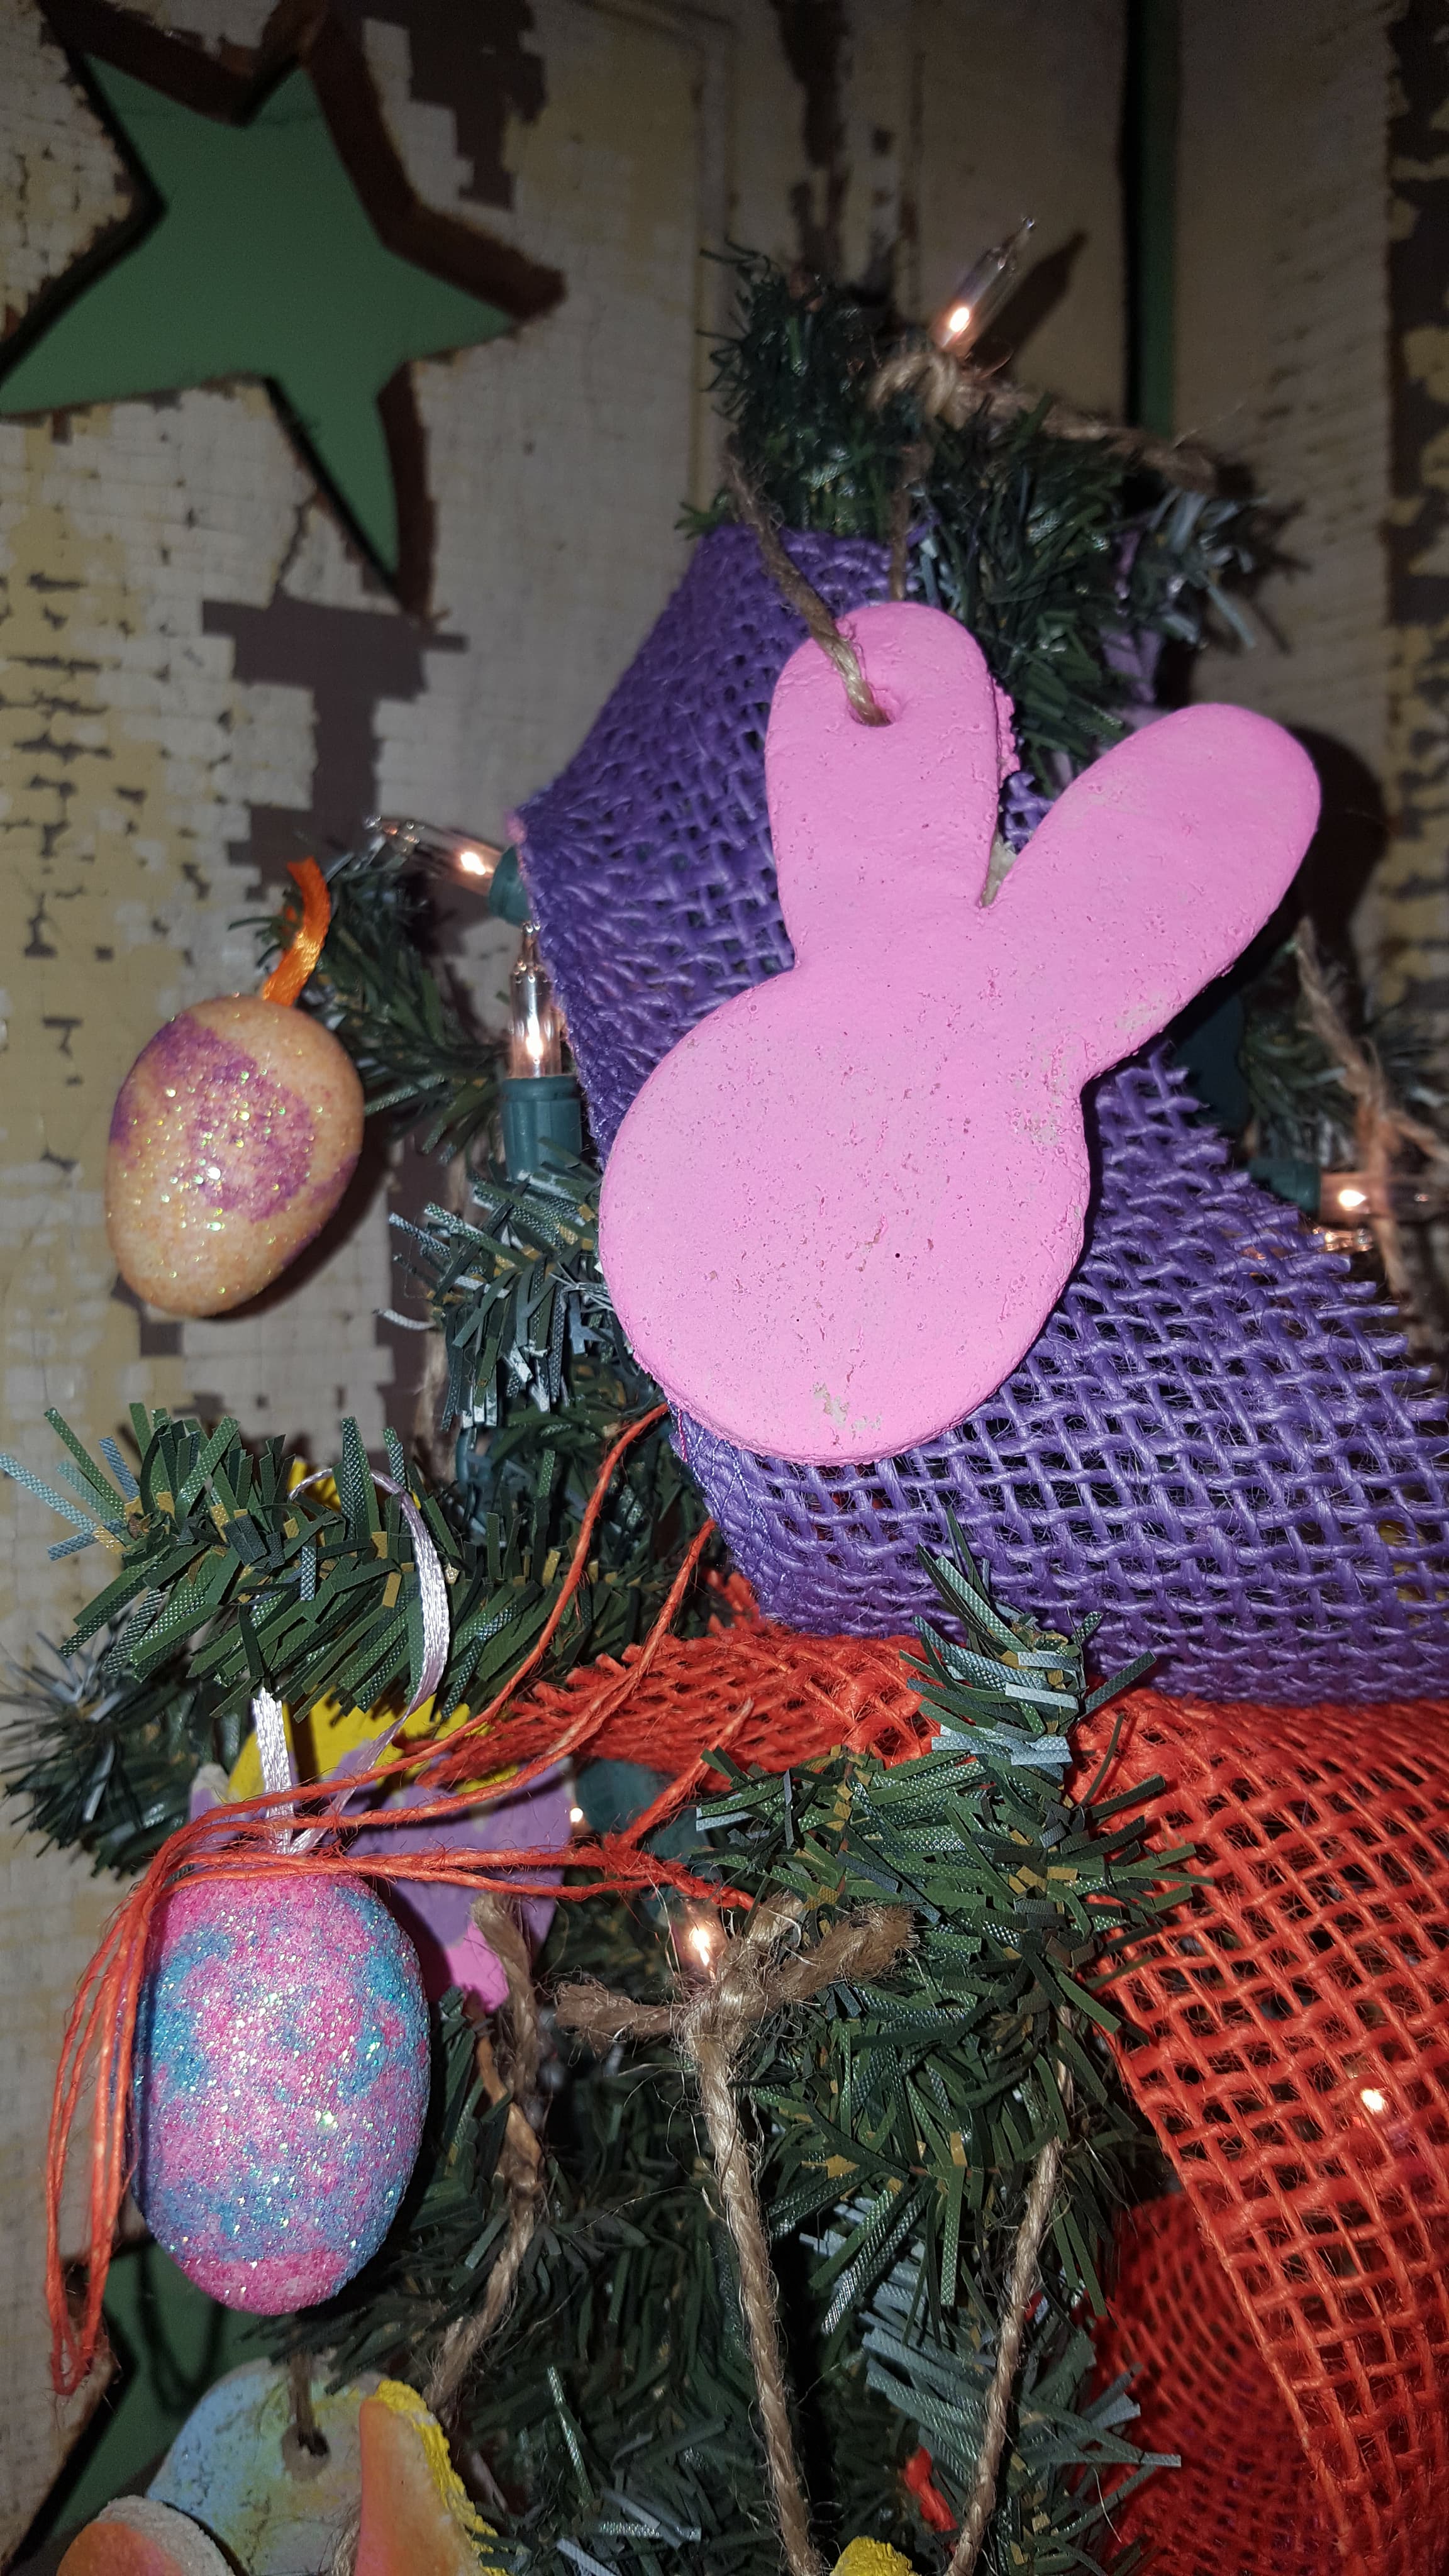 A primitive Easter tree decorated with handmade salt dough ornaments, fake Easter eggs and colored burlap.